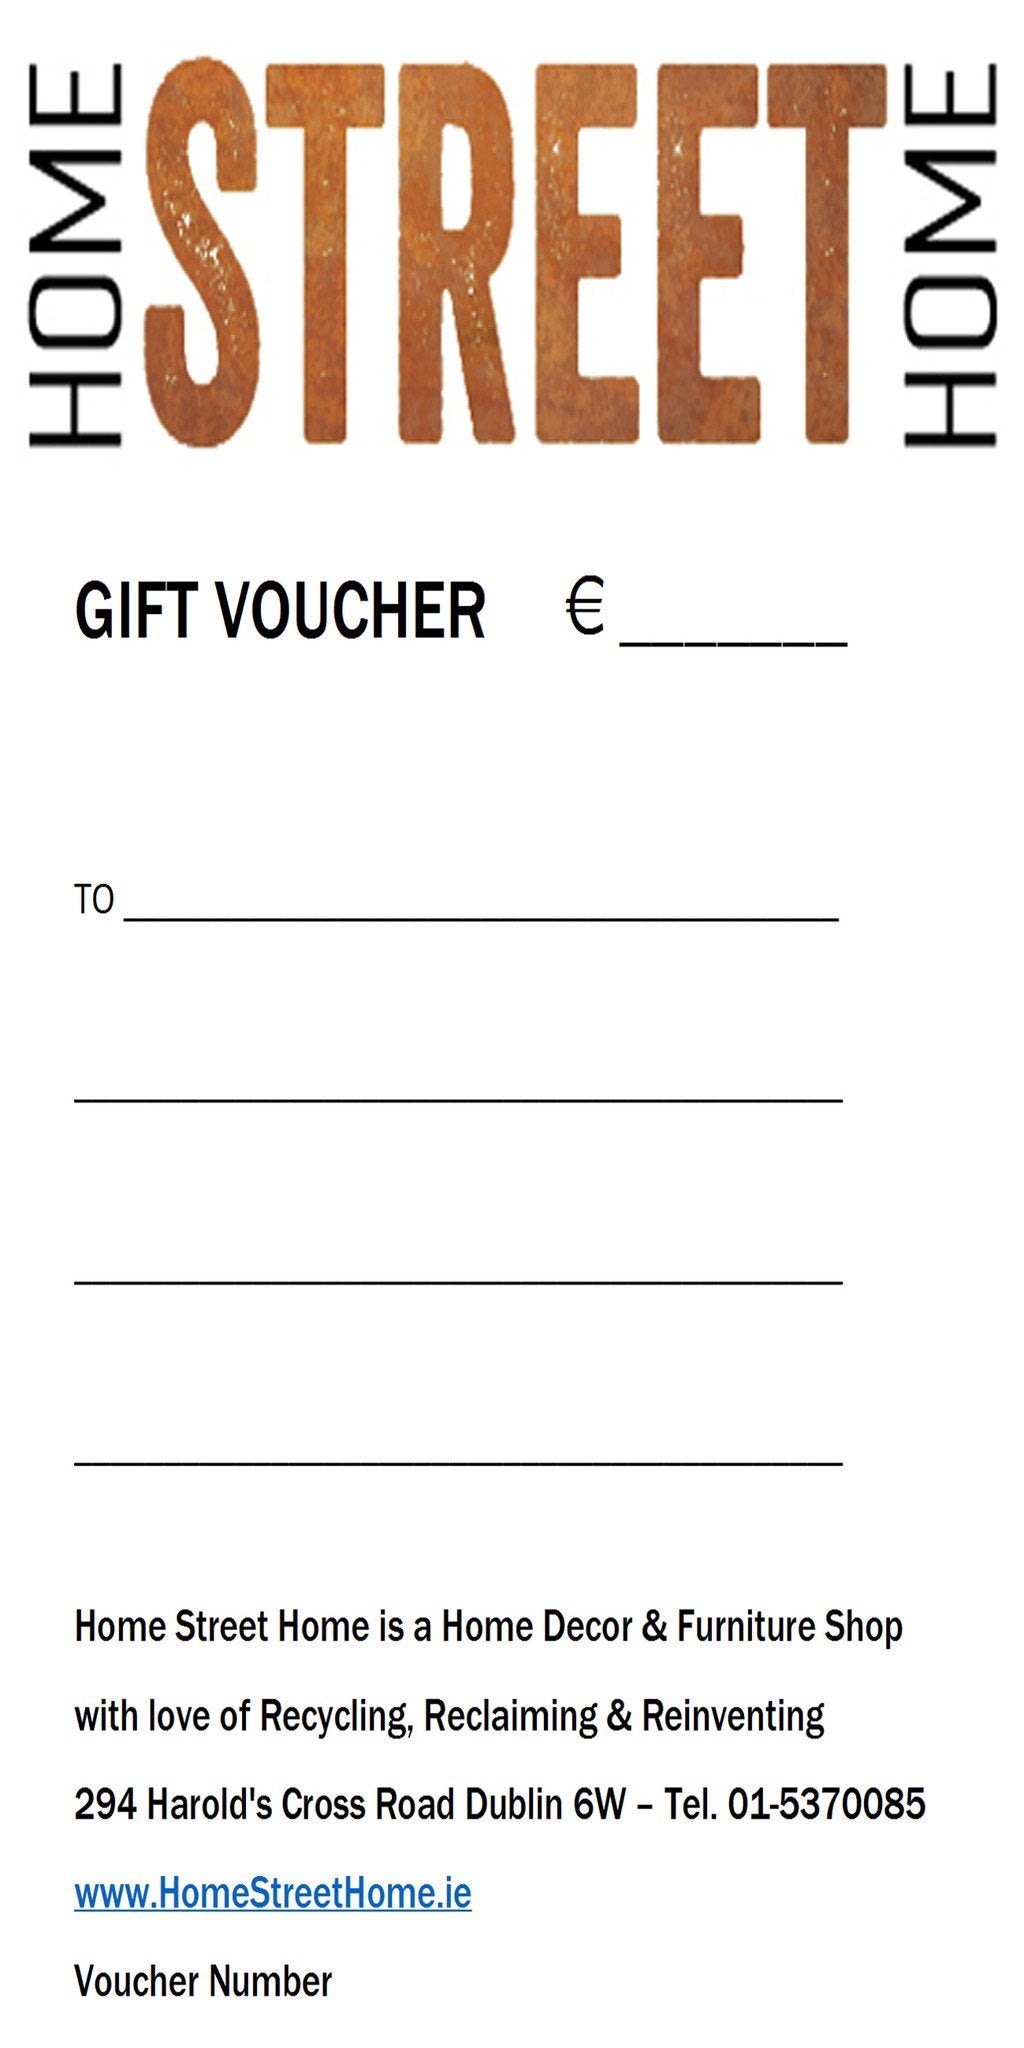 Gift Voucher - HomeStreetHome.ie